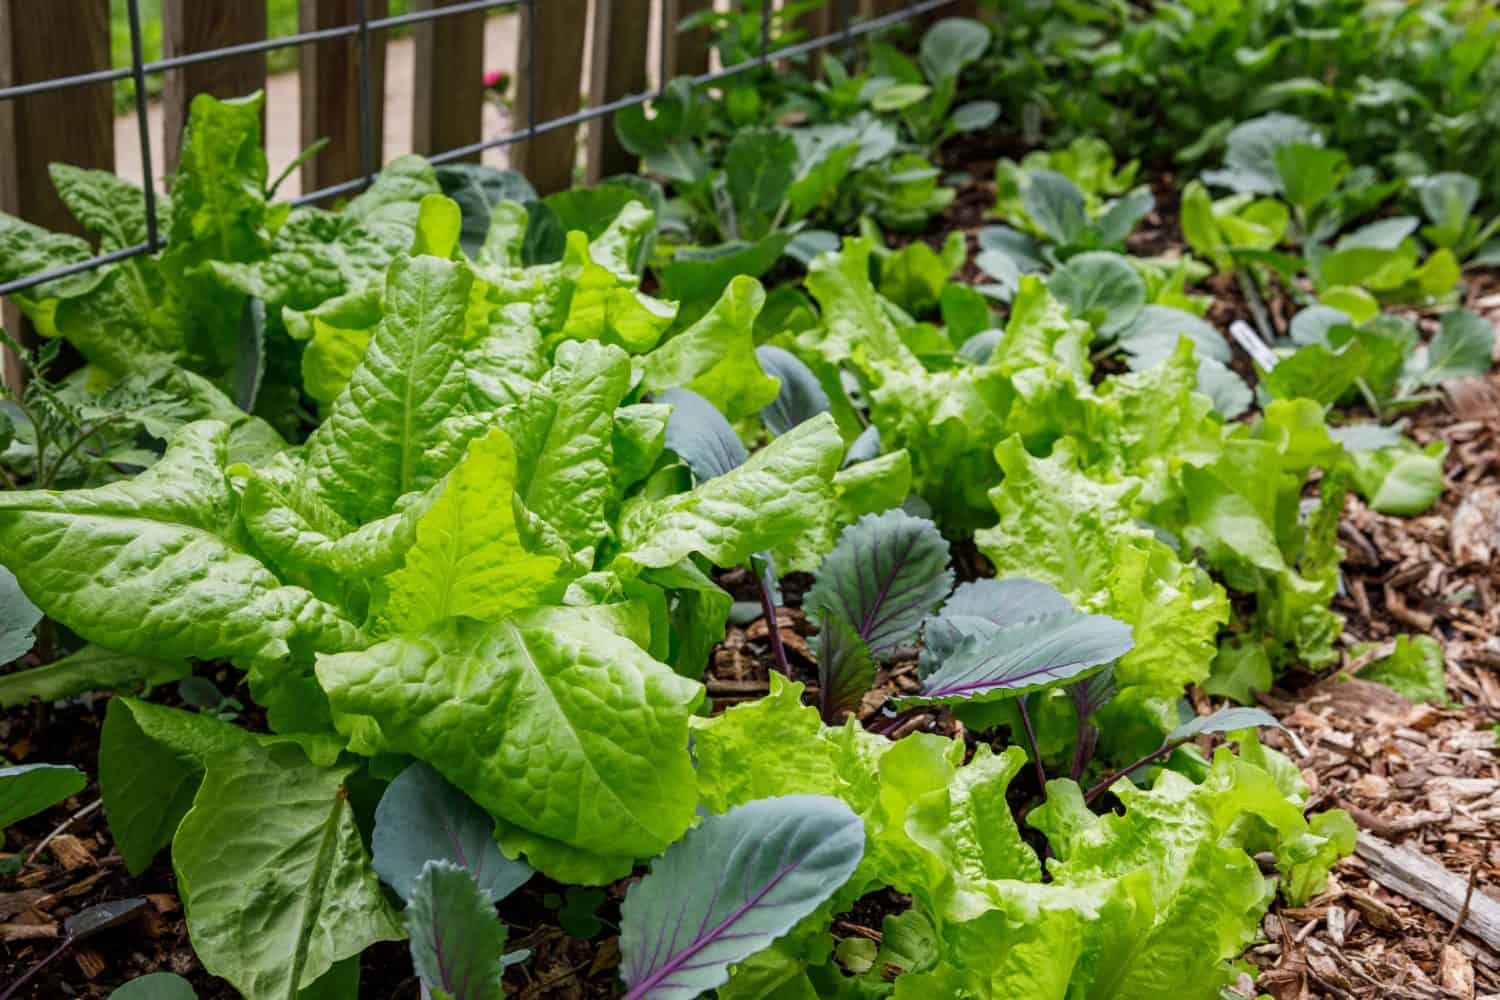 Leaf lettuce and cabbage interplanted in a home organic kitchen garden in the springtime